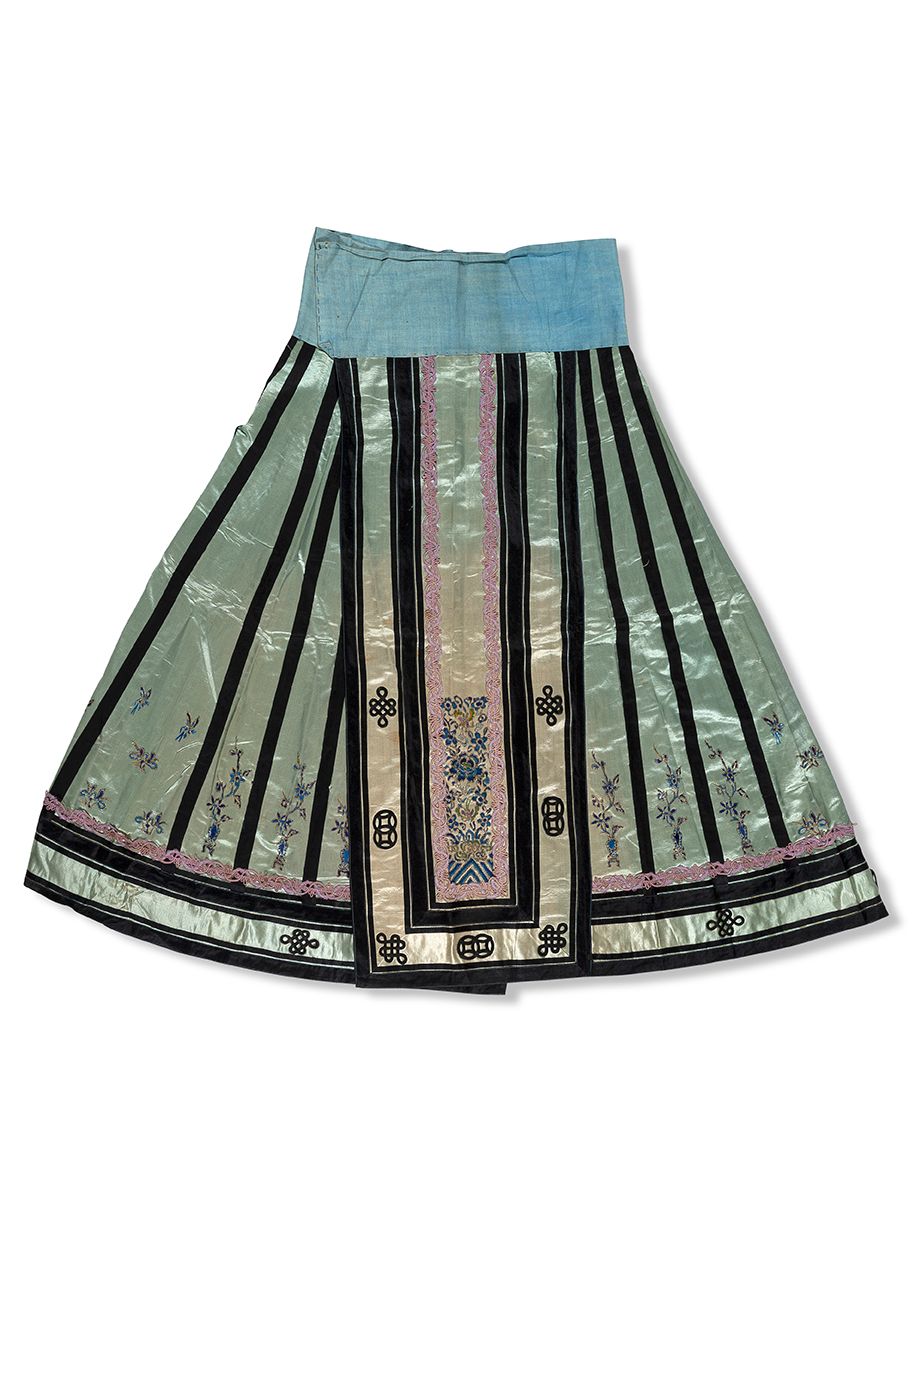 CHINE VERS 1900 Skirt (mang qun)
Water-green silk satin embroidered with gold an&hellip;